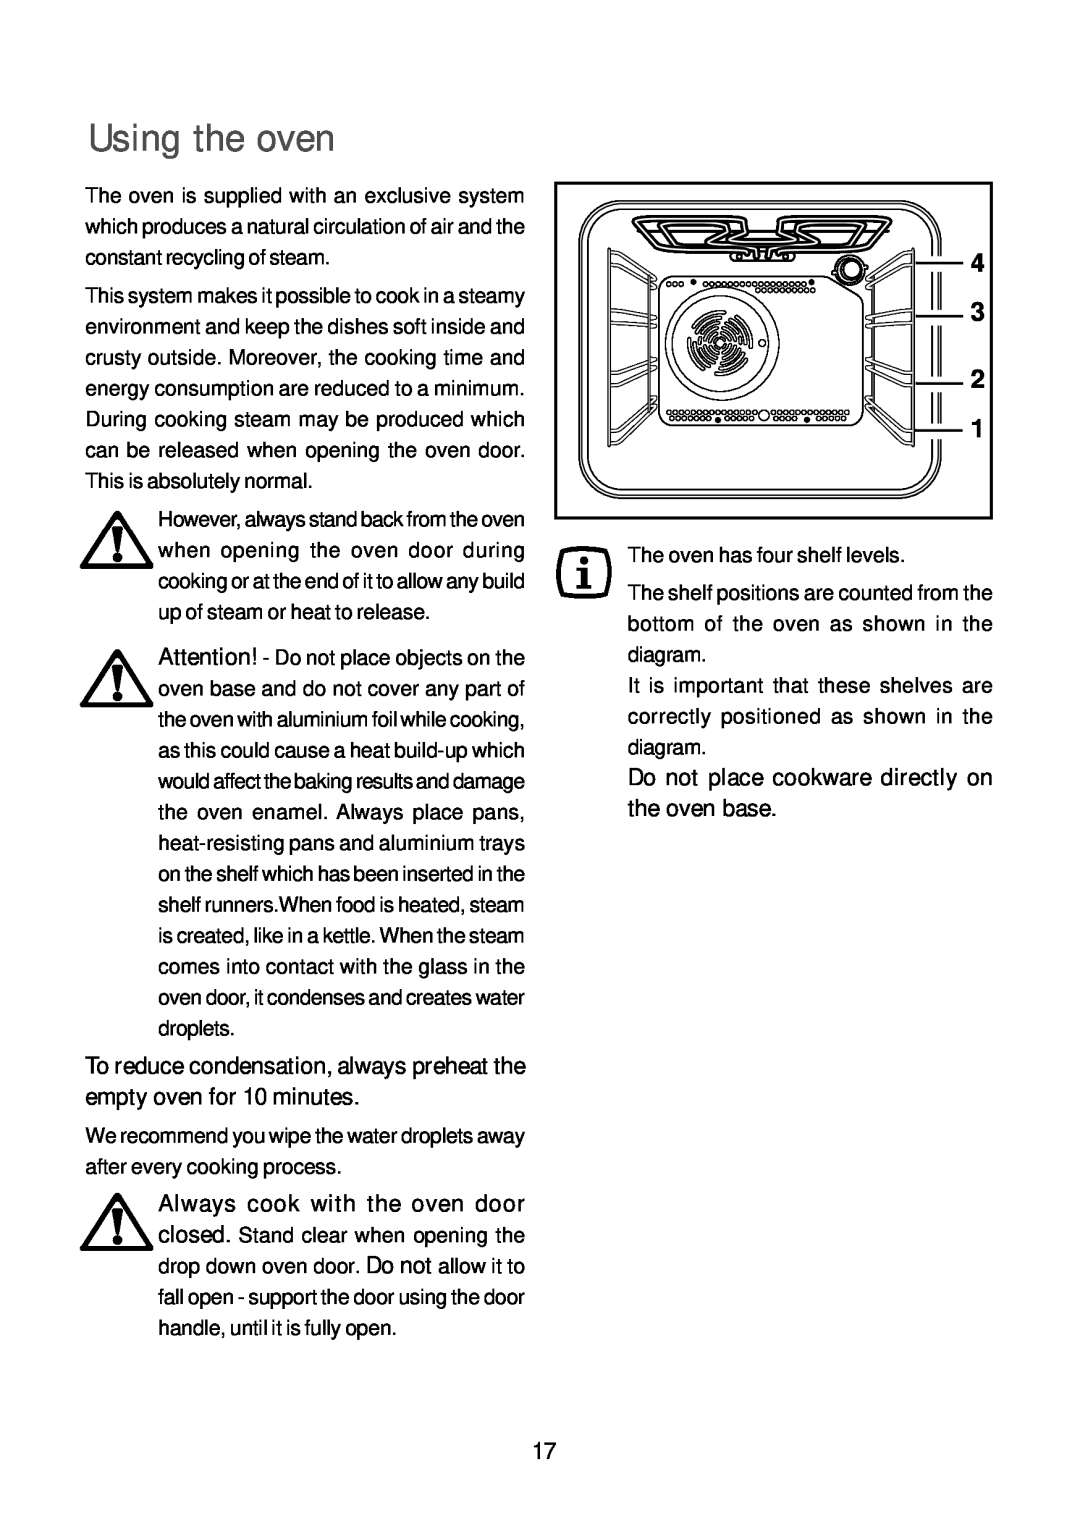 John Lewis JLBIOS664 instruction manual Using the oven, Do not place cookware directly on the oven base 